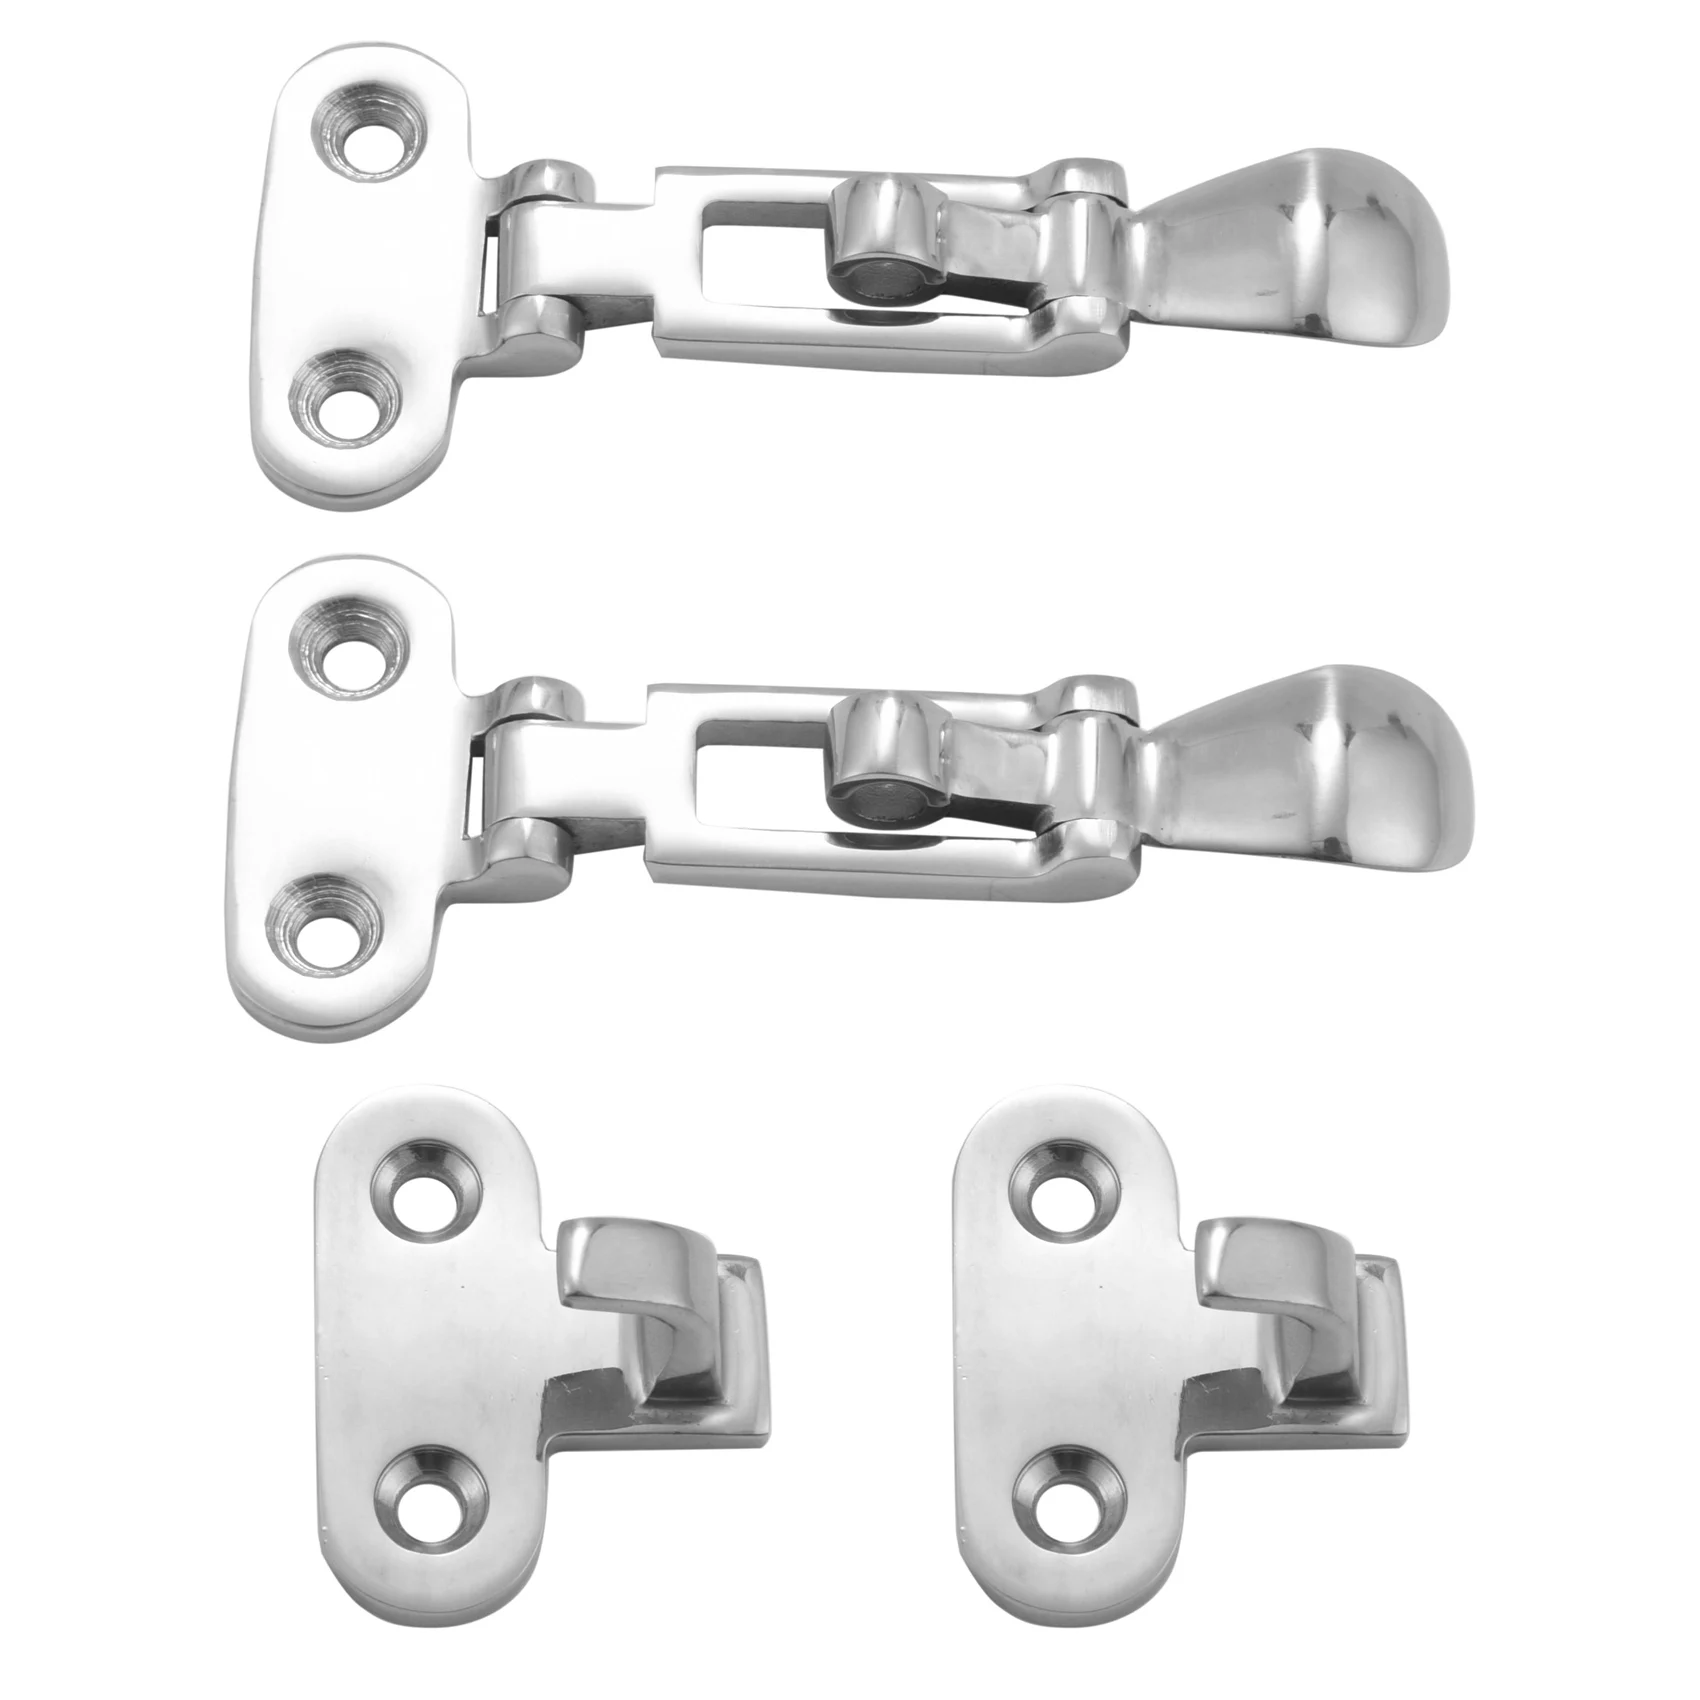 

2Pcs Marine Boat Deck Lock Hasp 316 Stainless Steel Lockable Hold Down Clamp Anti-Rattle Latch Fastener Boat Yacht Accessory